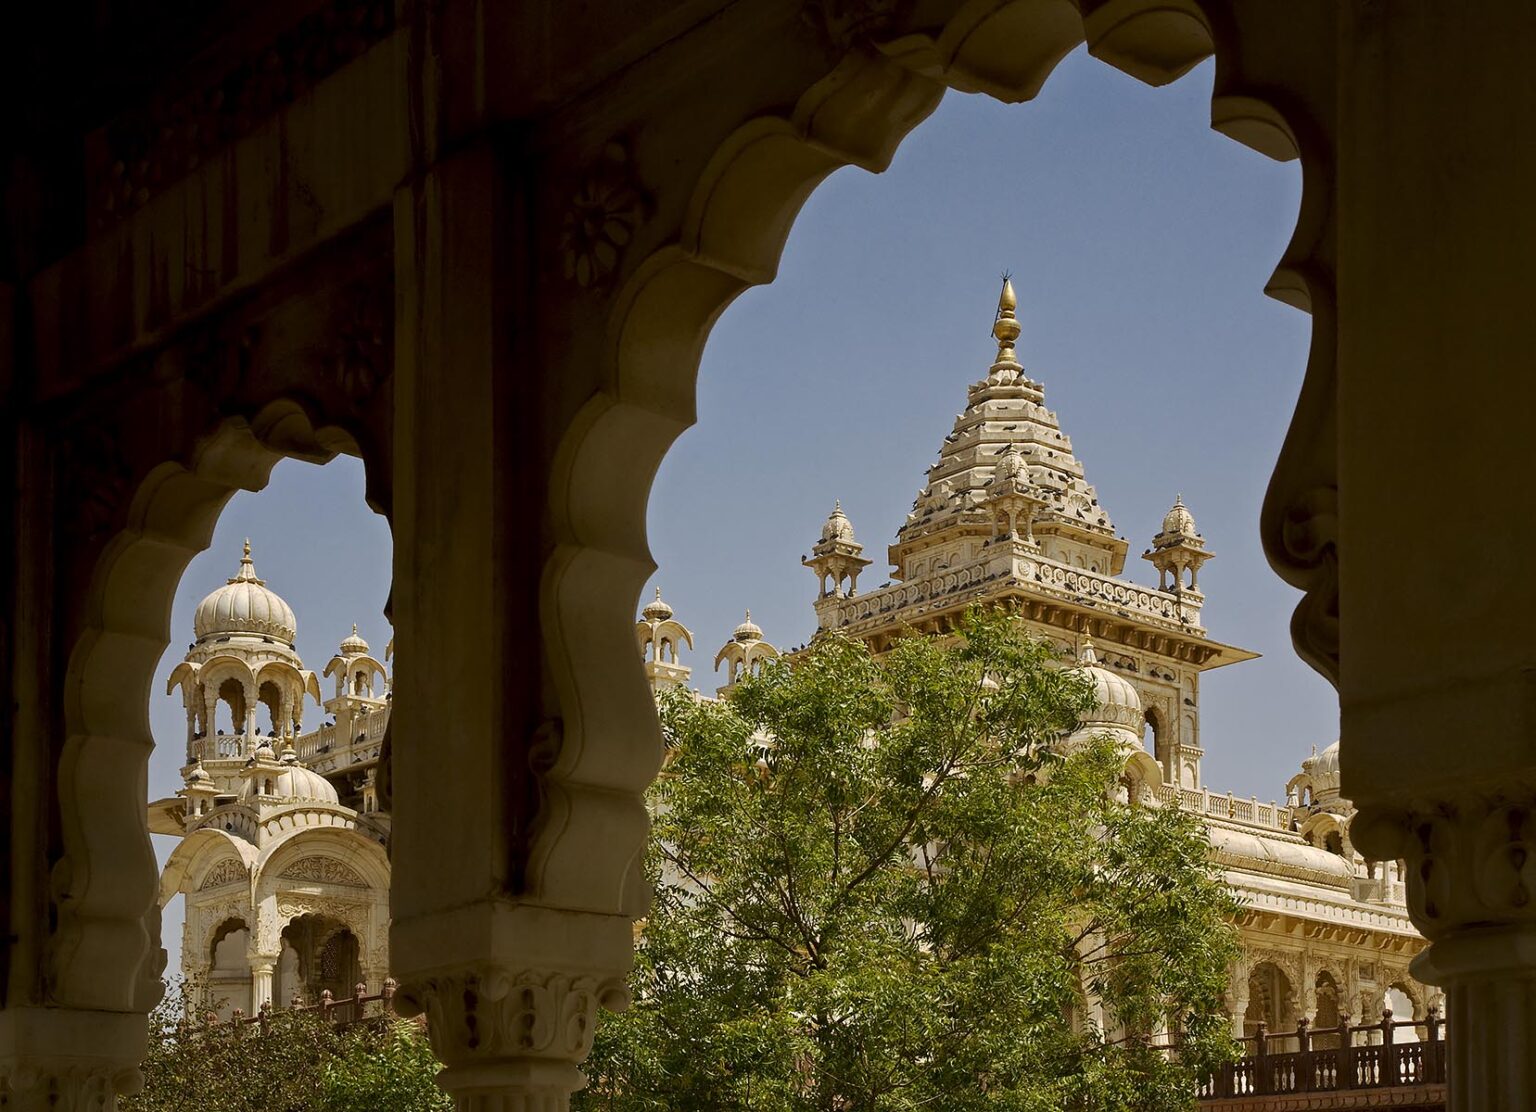 The white marble JASWANT THADA was built in 1899 as a memorial to MAHARAJA JASWANT SINGH ll - JOHDPUR, RAJASTHAN, INDIA